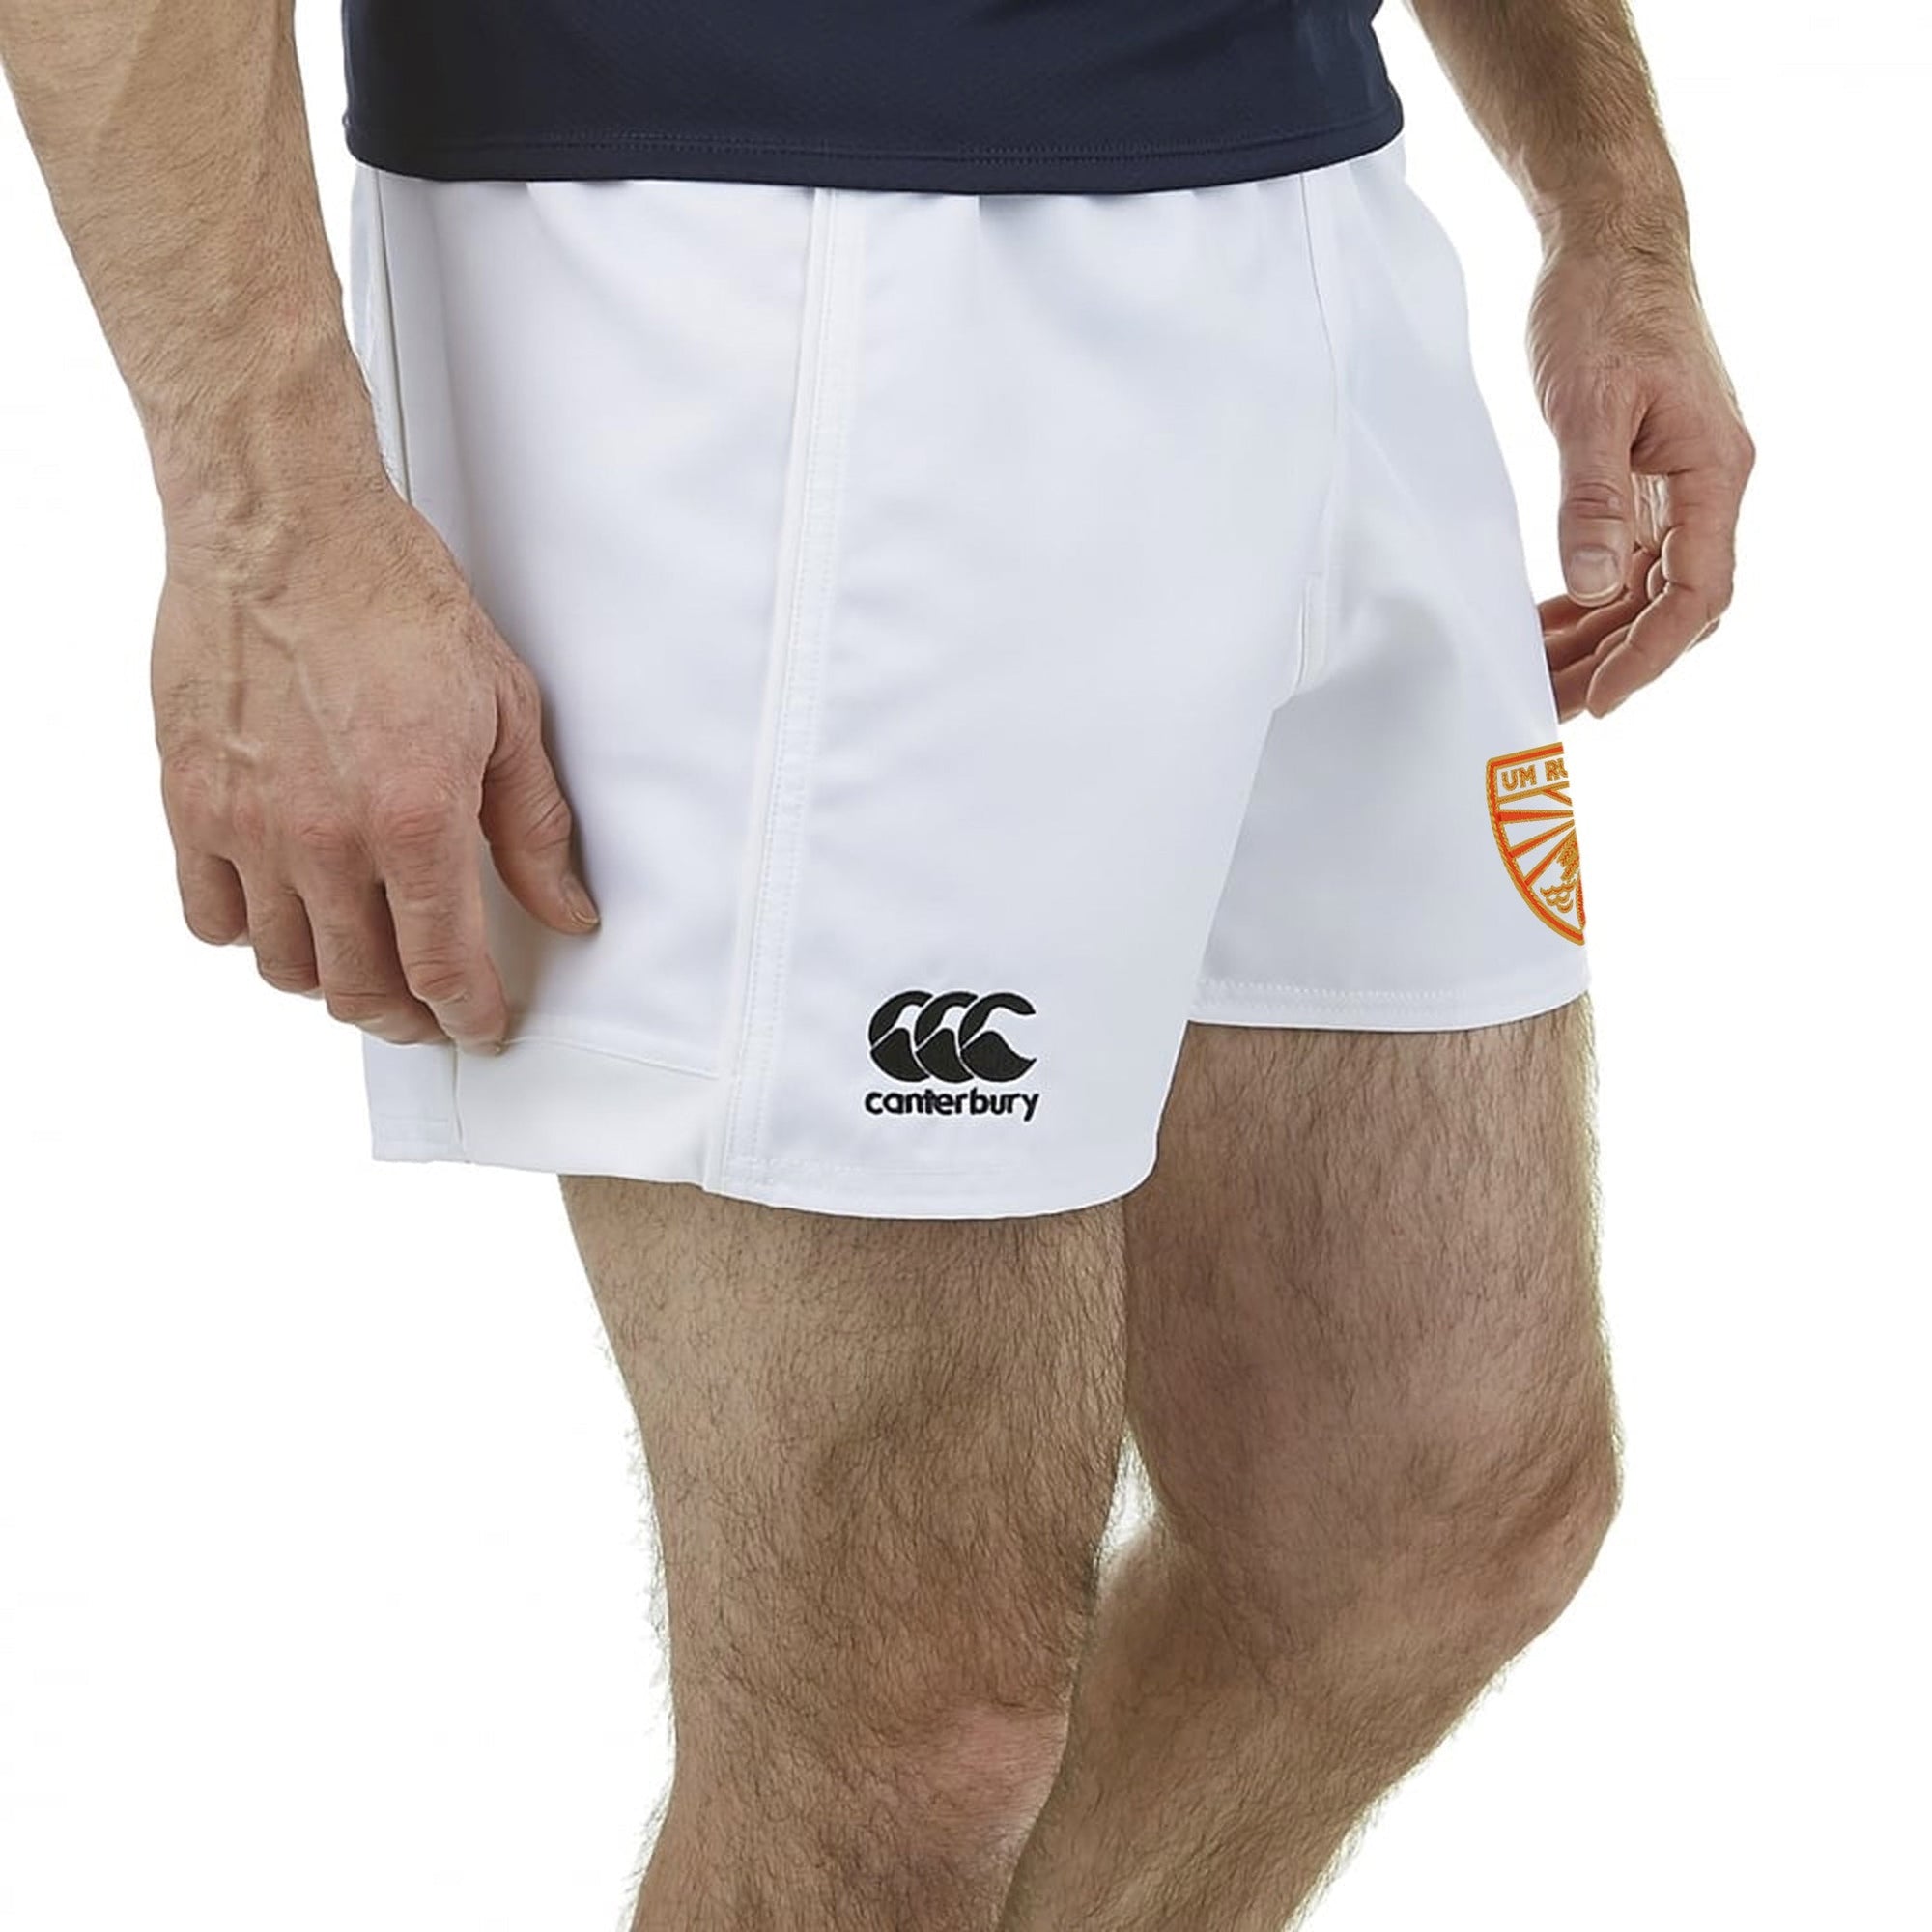 Rugby Imports UMiami Rugby CCC Advantage Rugby Short